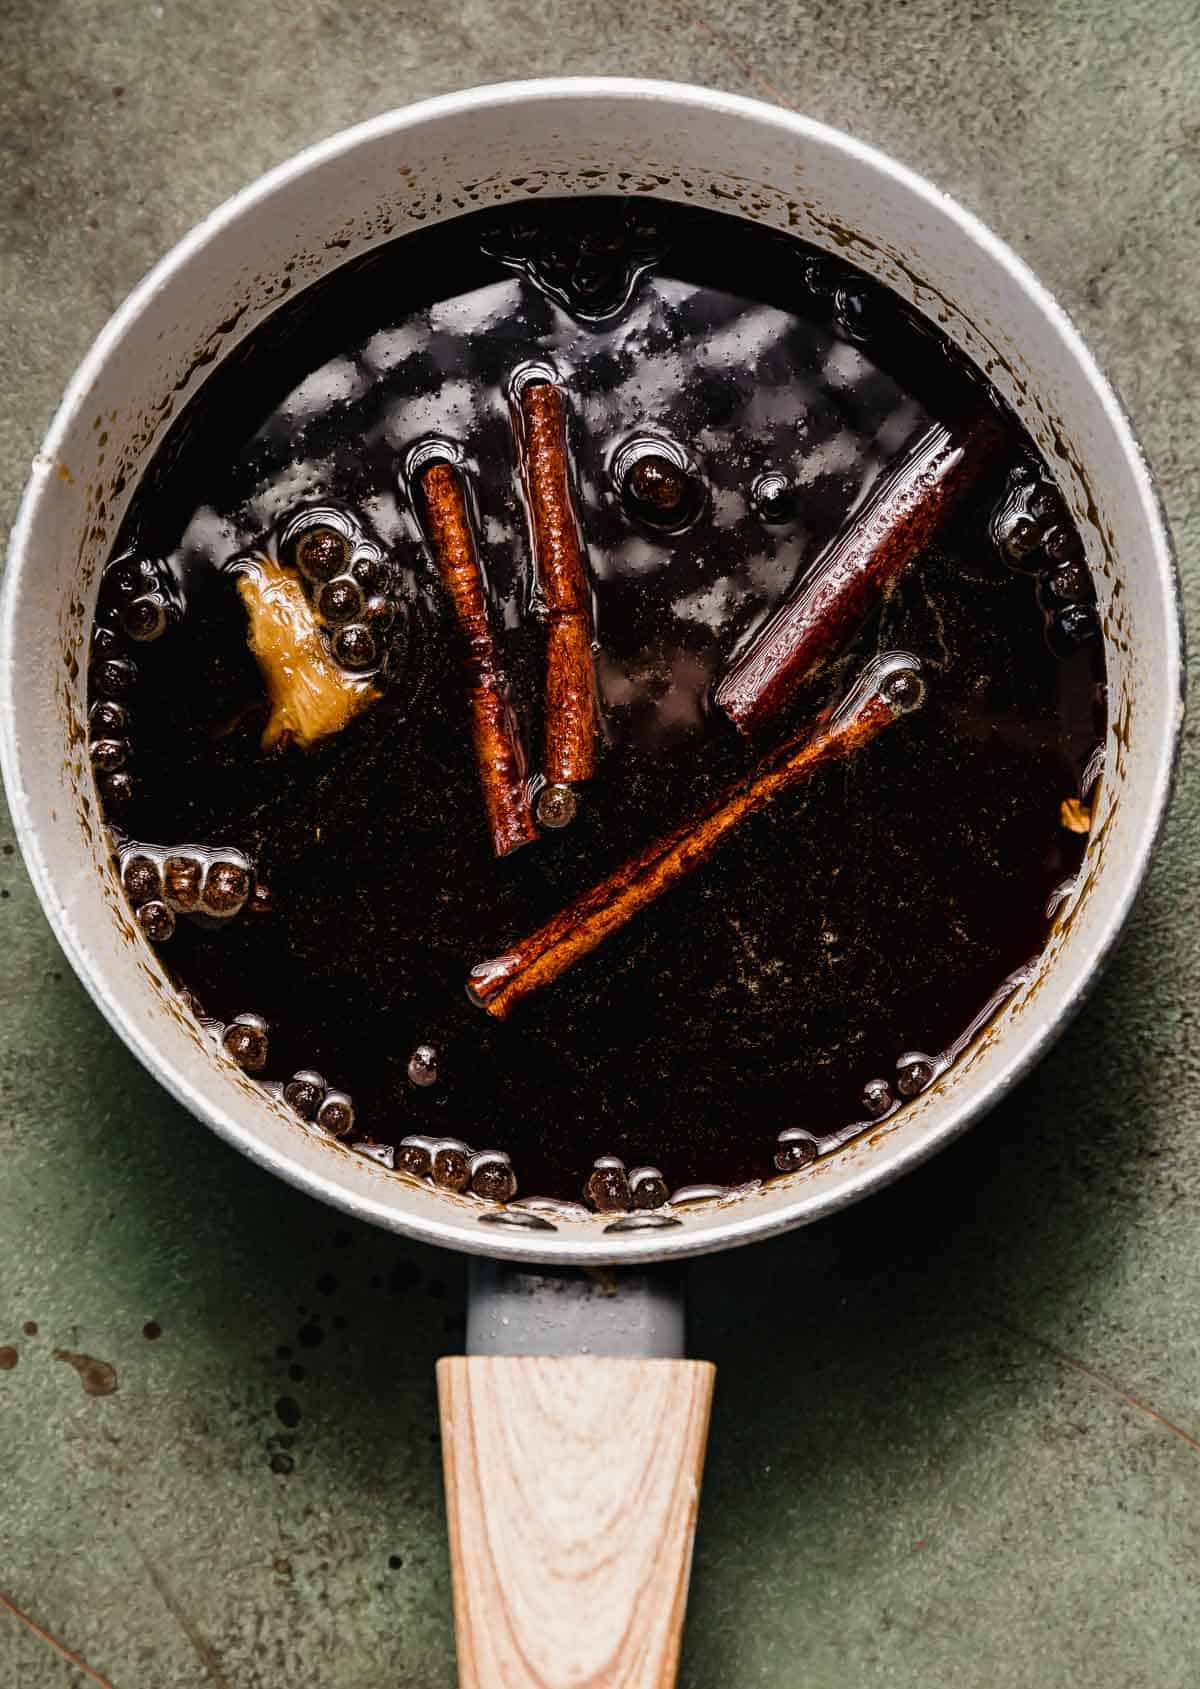 Allspice berries, cinnamon sticks, and fresh ginger in a dark Gingerbread Syrup that's in a saucepan on a green background.